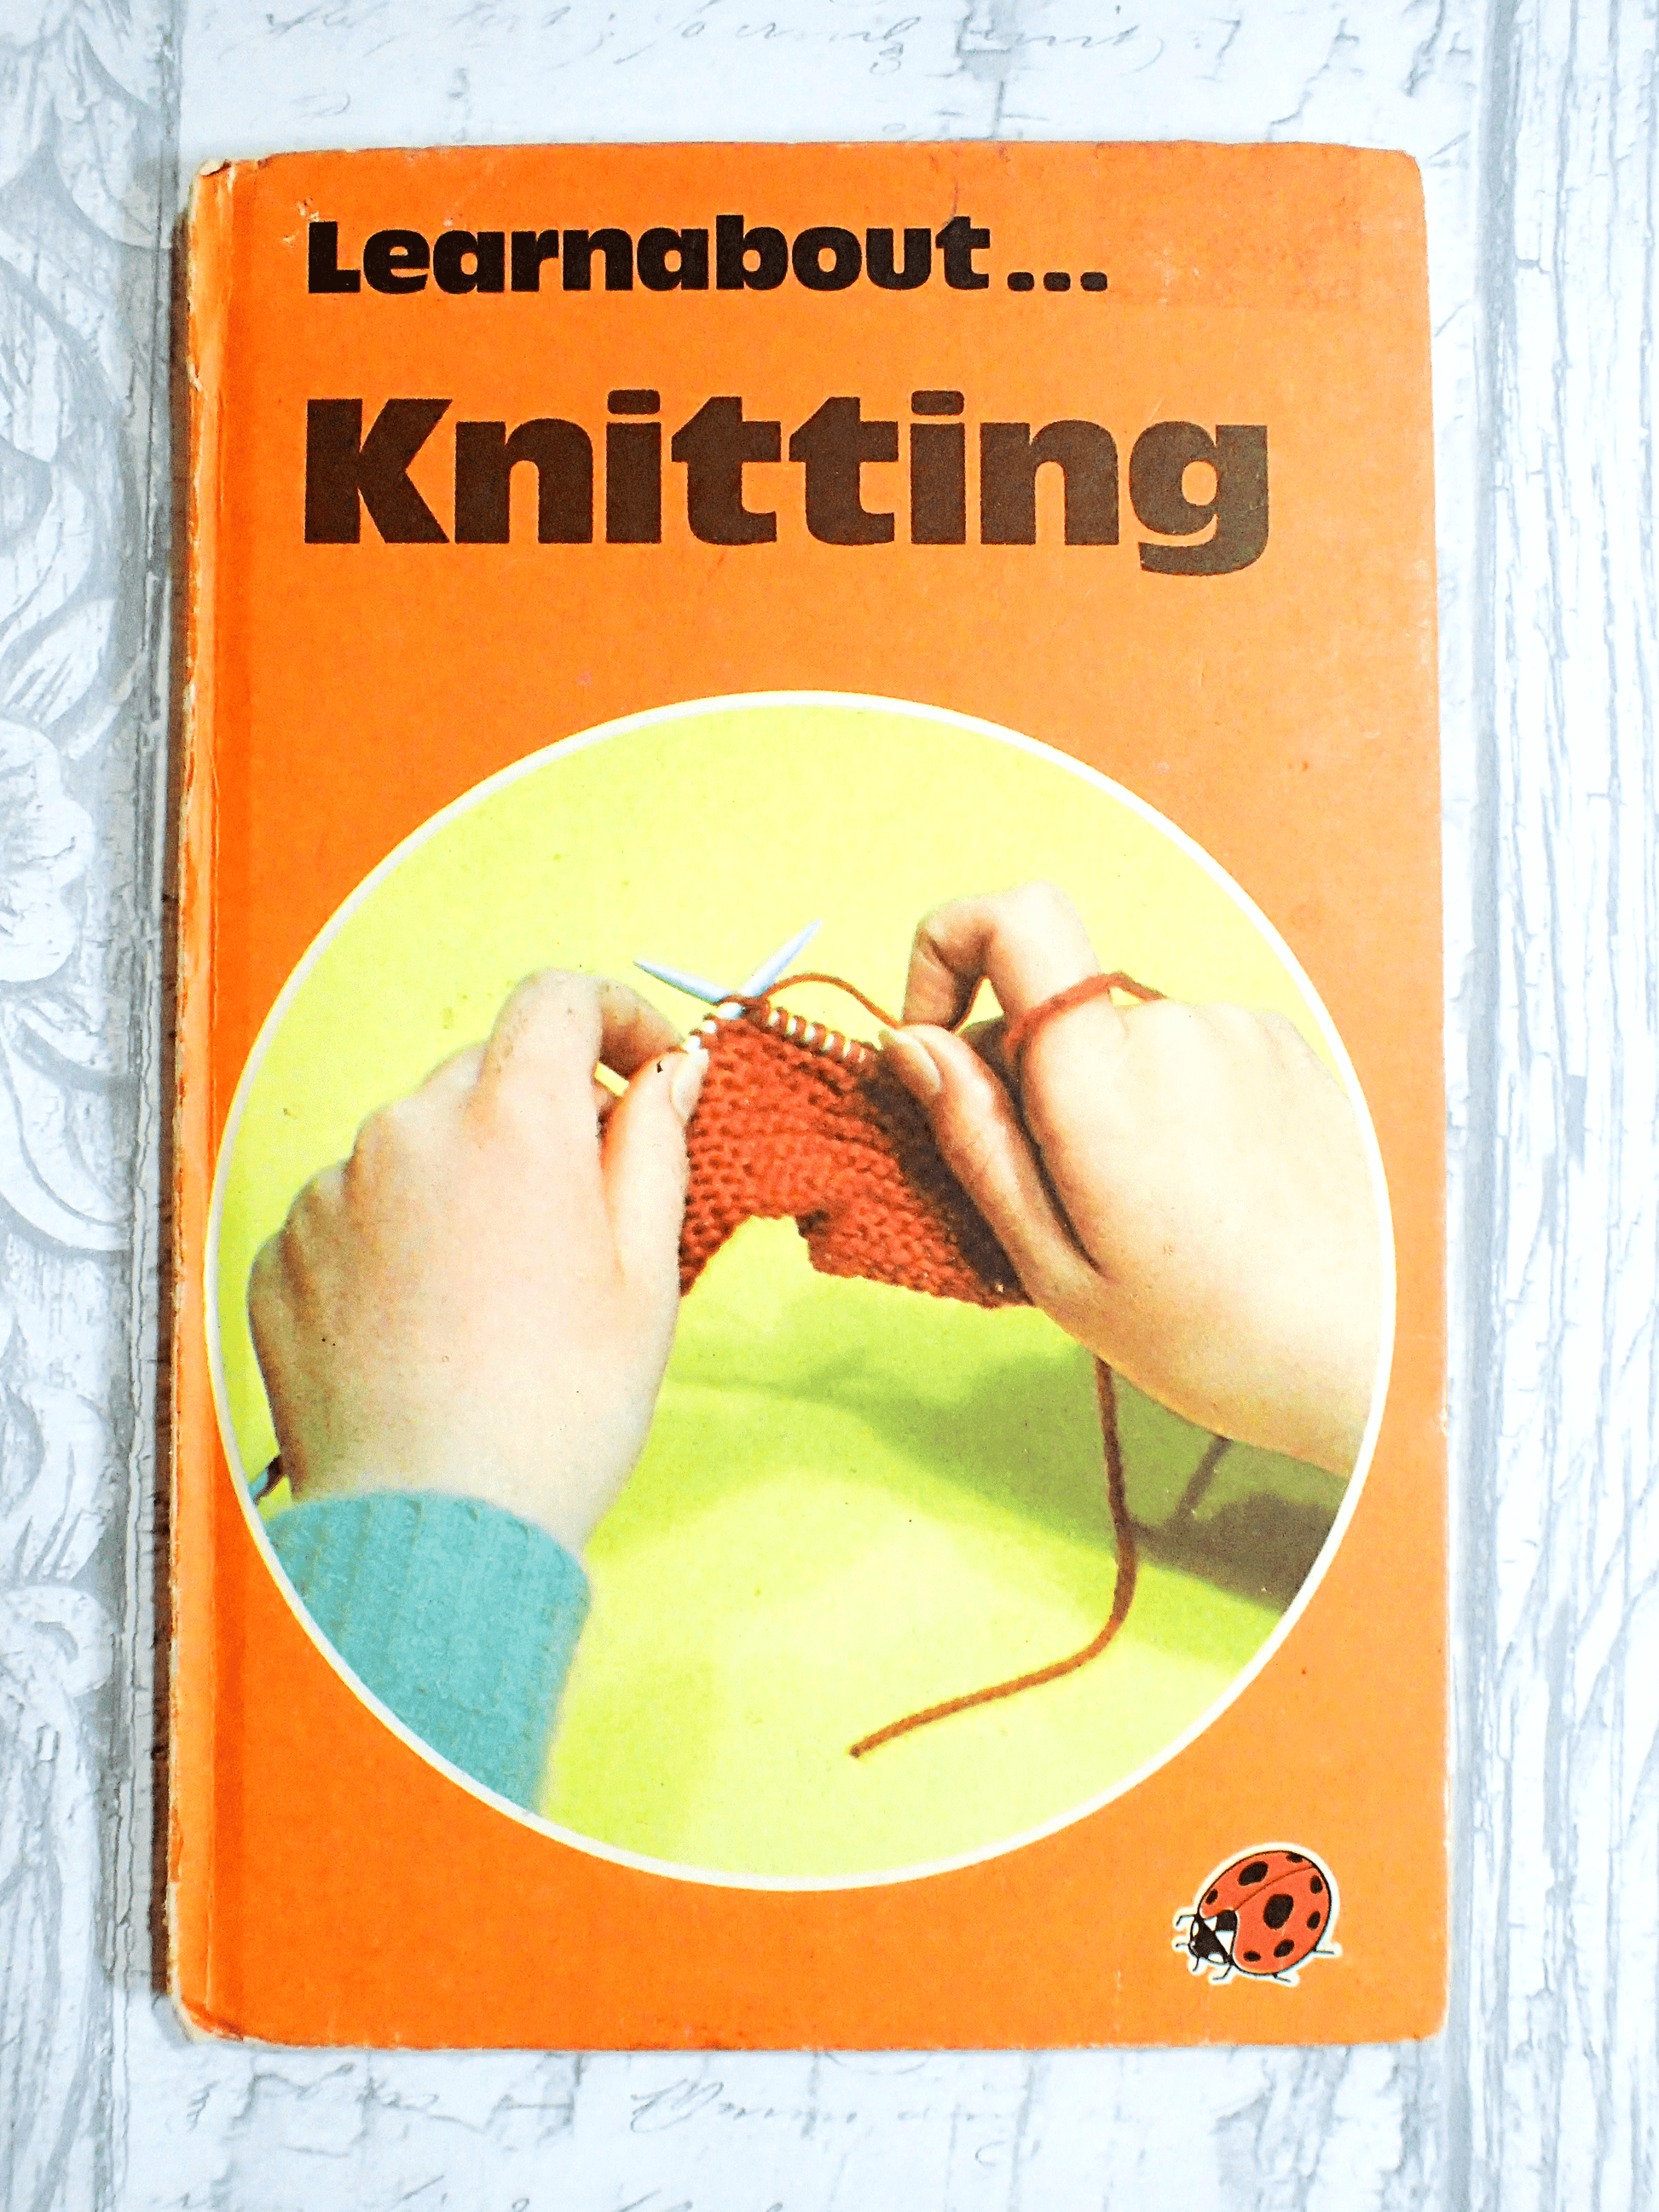 Learnabout knitting cover of vintage book by Ladybird with orange cover and hands knitting, against a light background. 